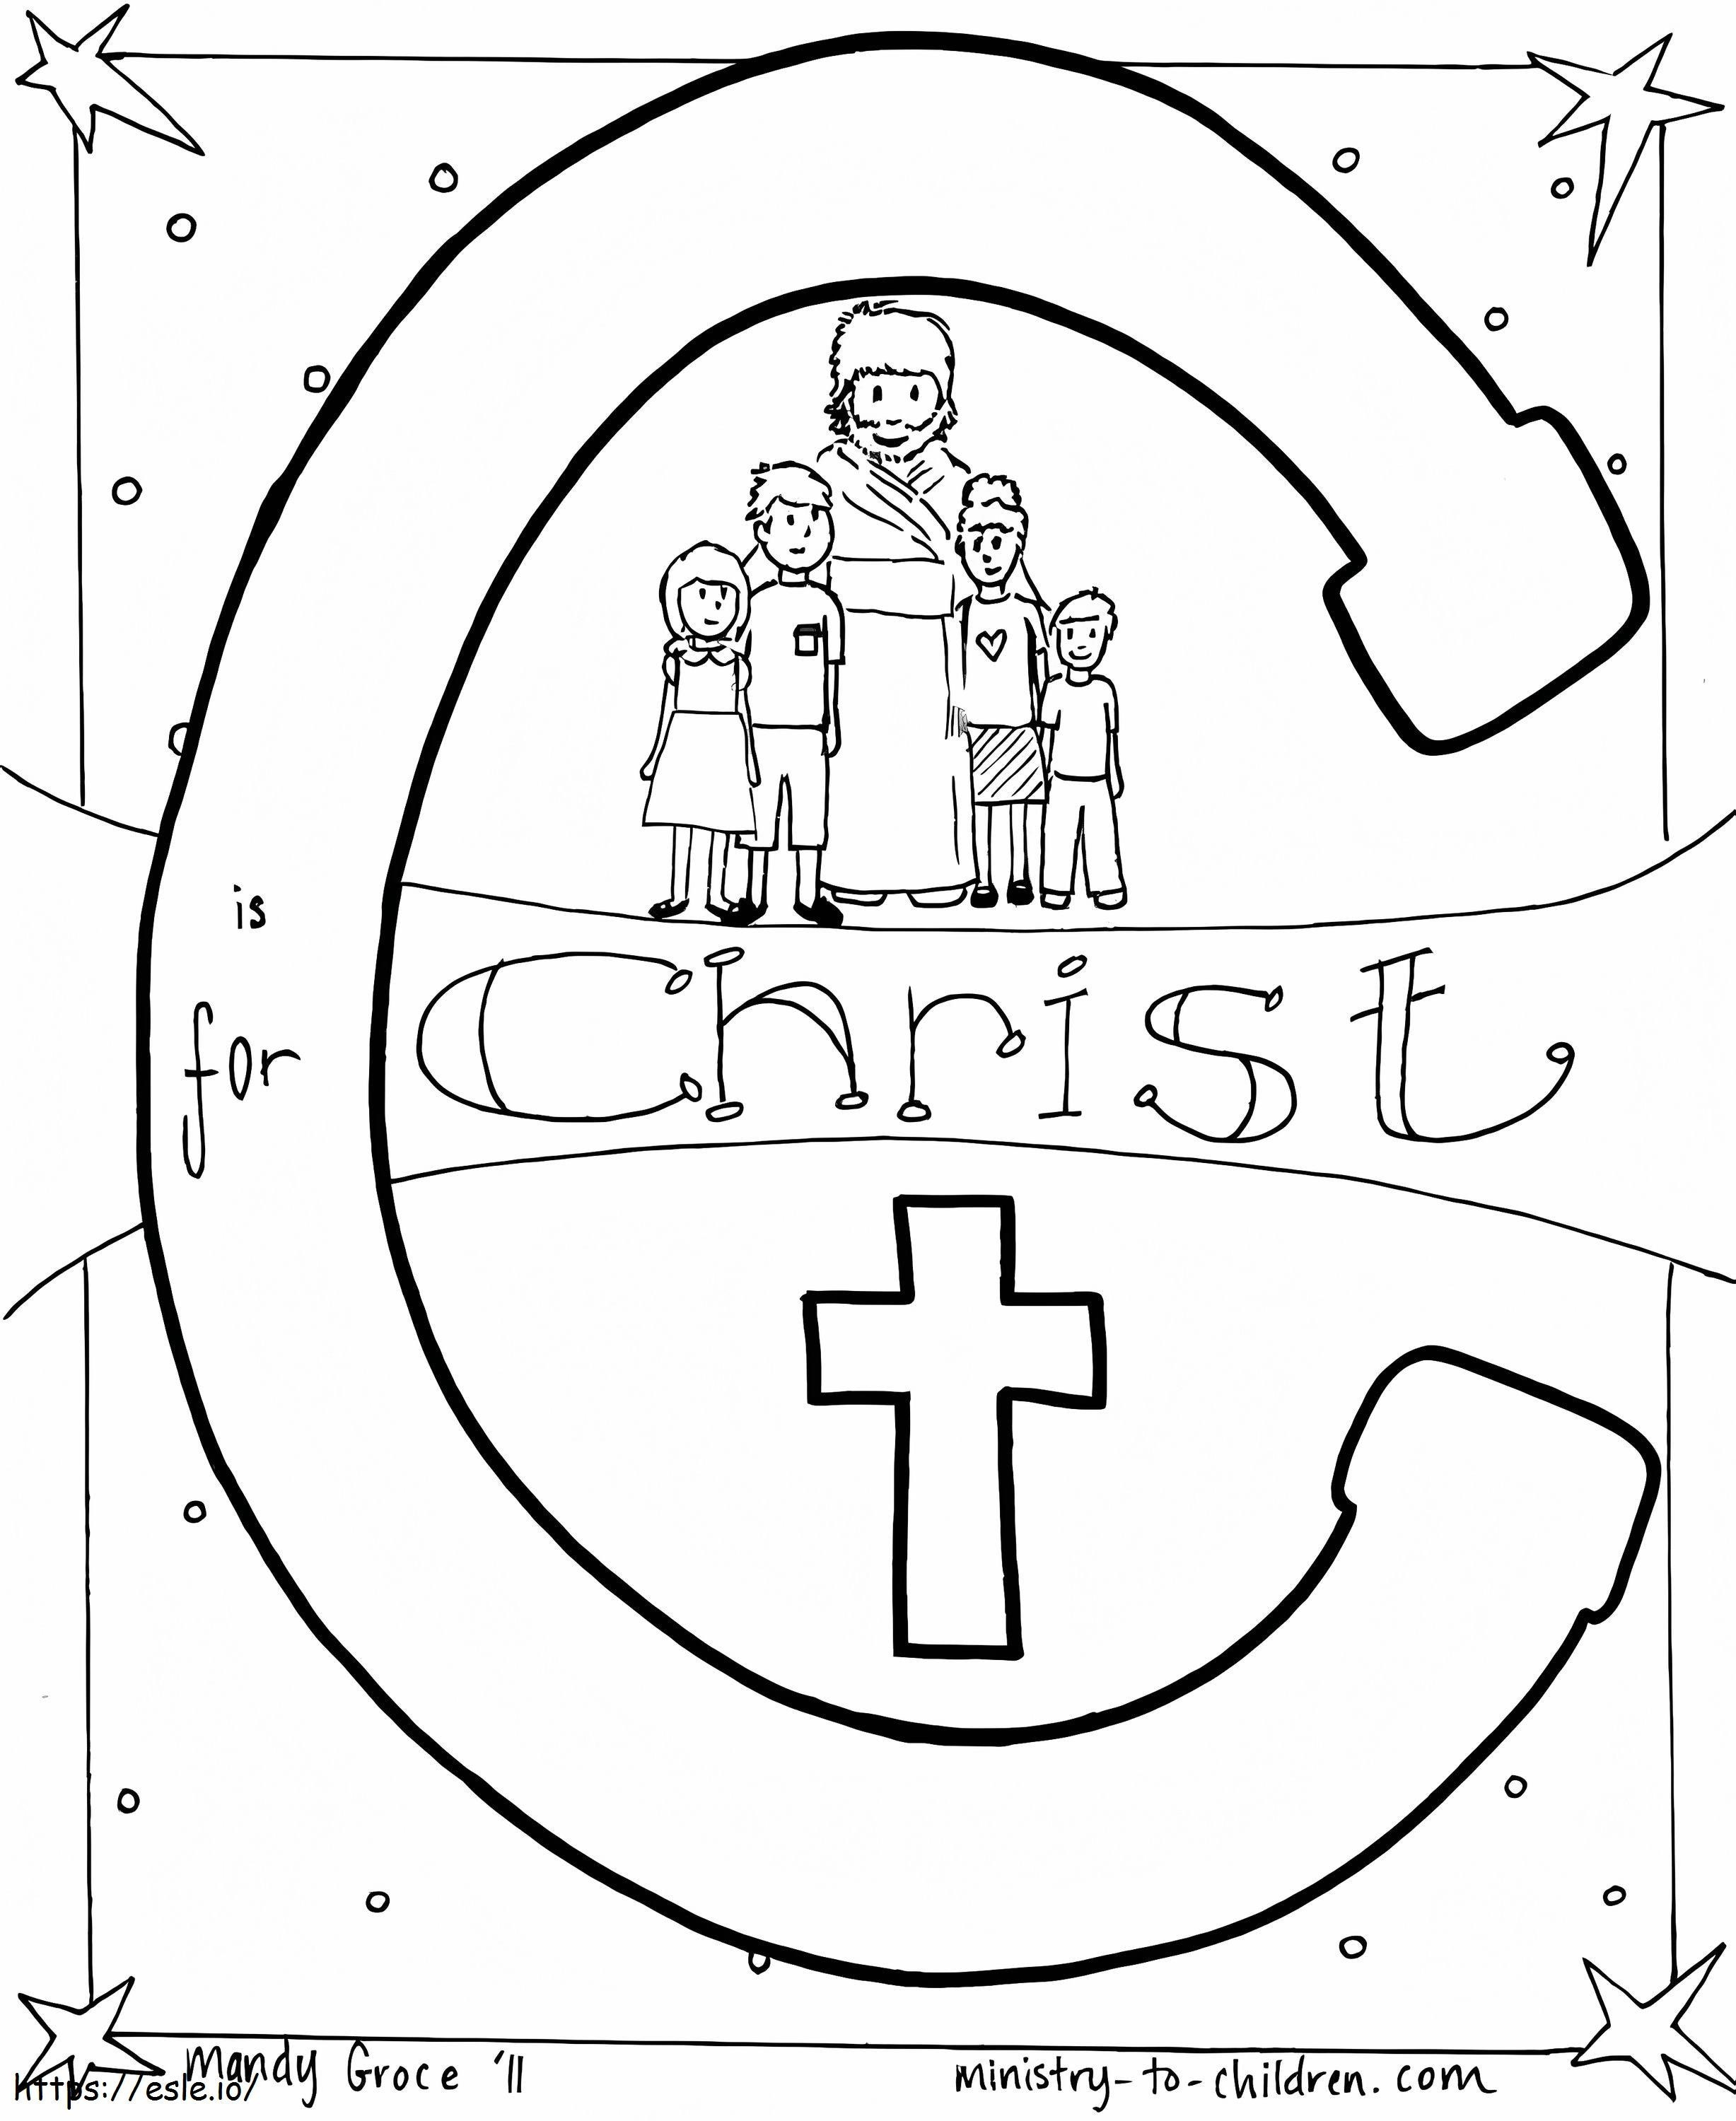 C Is For Christ coloring page